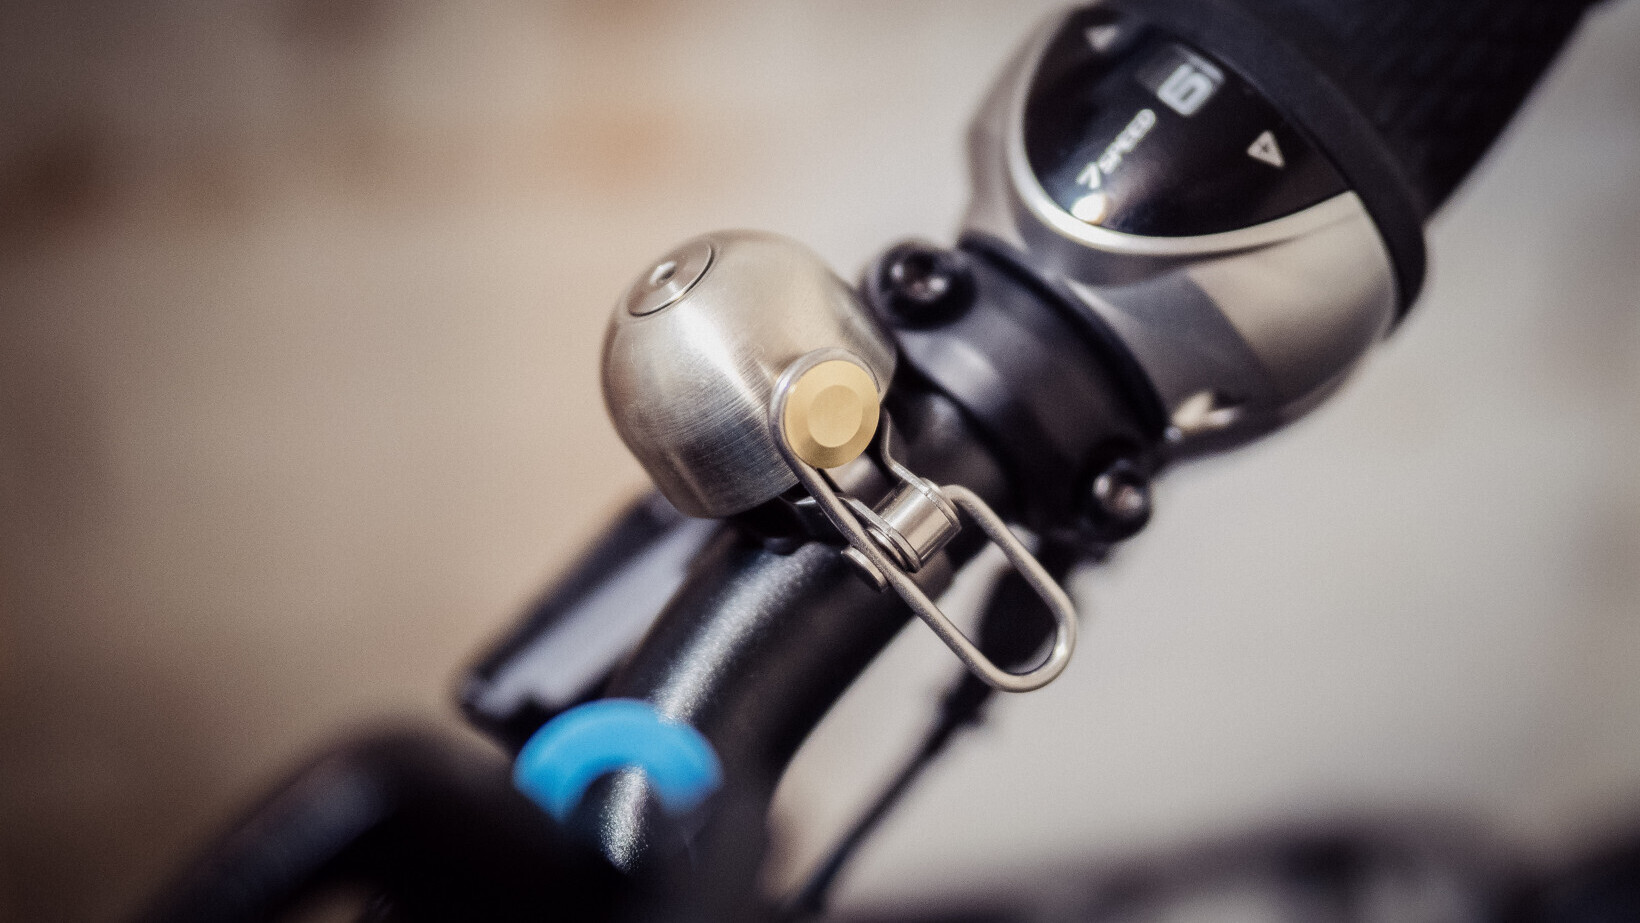 The Spurcycle bike bell is so nice, it might just be worth paying $49 for